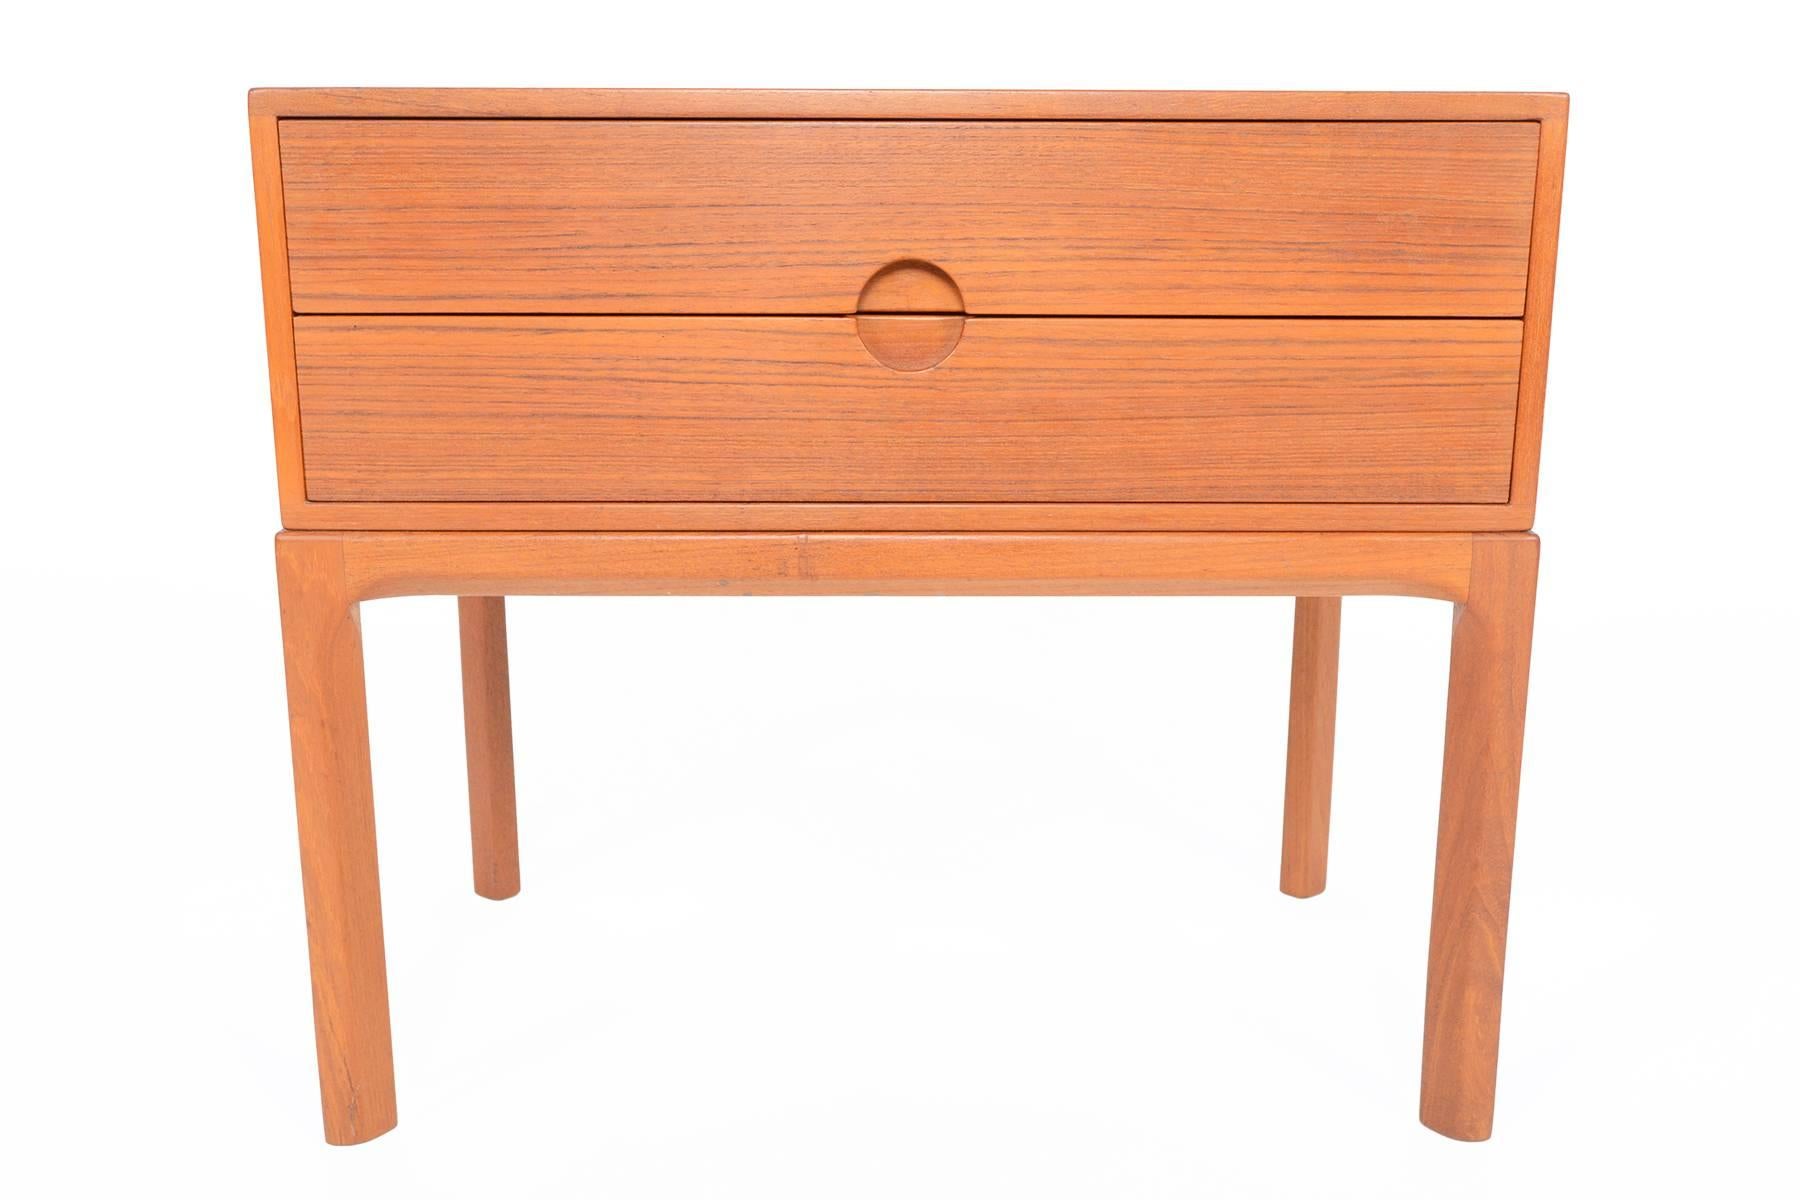 This beautiful model 384 Danish modern Mid-Century entry chest will add style and elegance to any modern home. Designed by Aksel Kjersgaard for Odder Mobler and crafted in teak and birch. Excellent for use as a nightstand or entryway chest, this